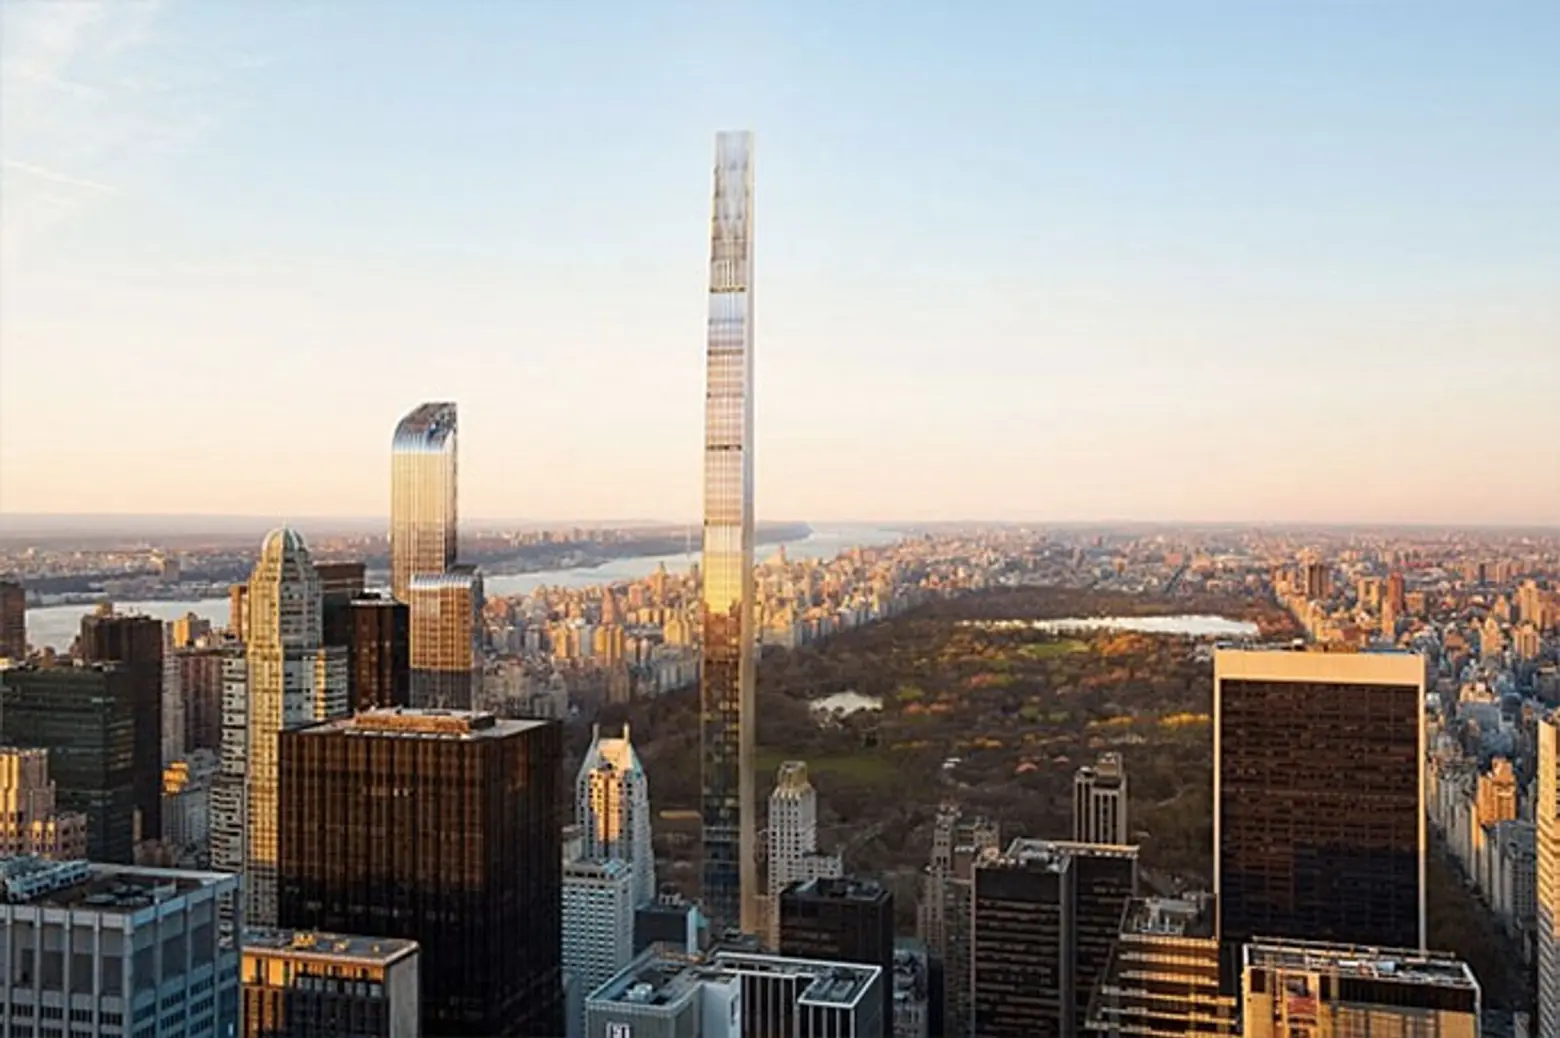 111 West 57th Street, SHoP Architects, skinniest tower in the world, NYC supertalls, tallest buildings, 432 Park Avenue